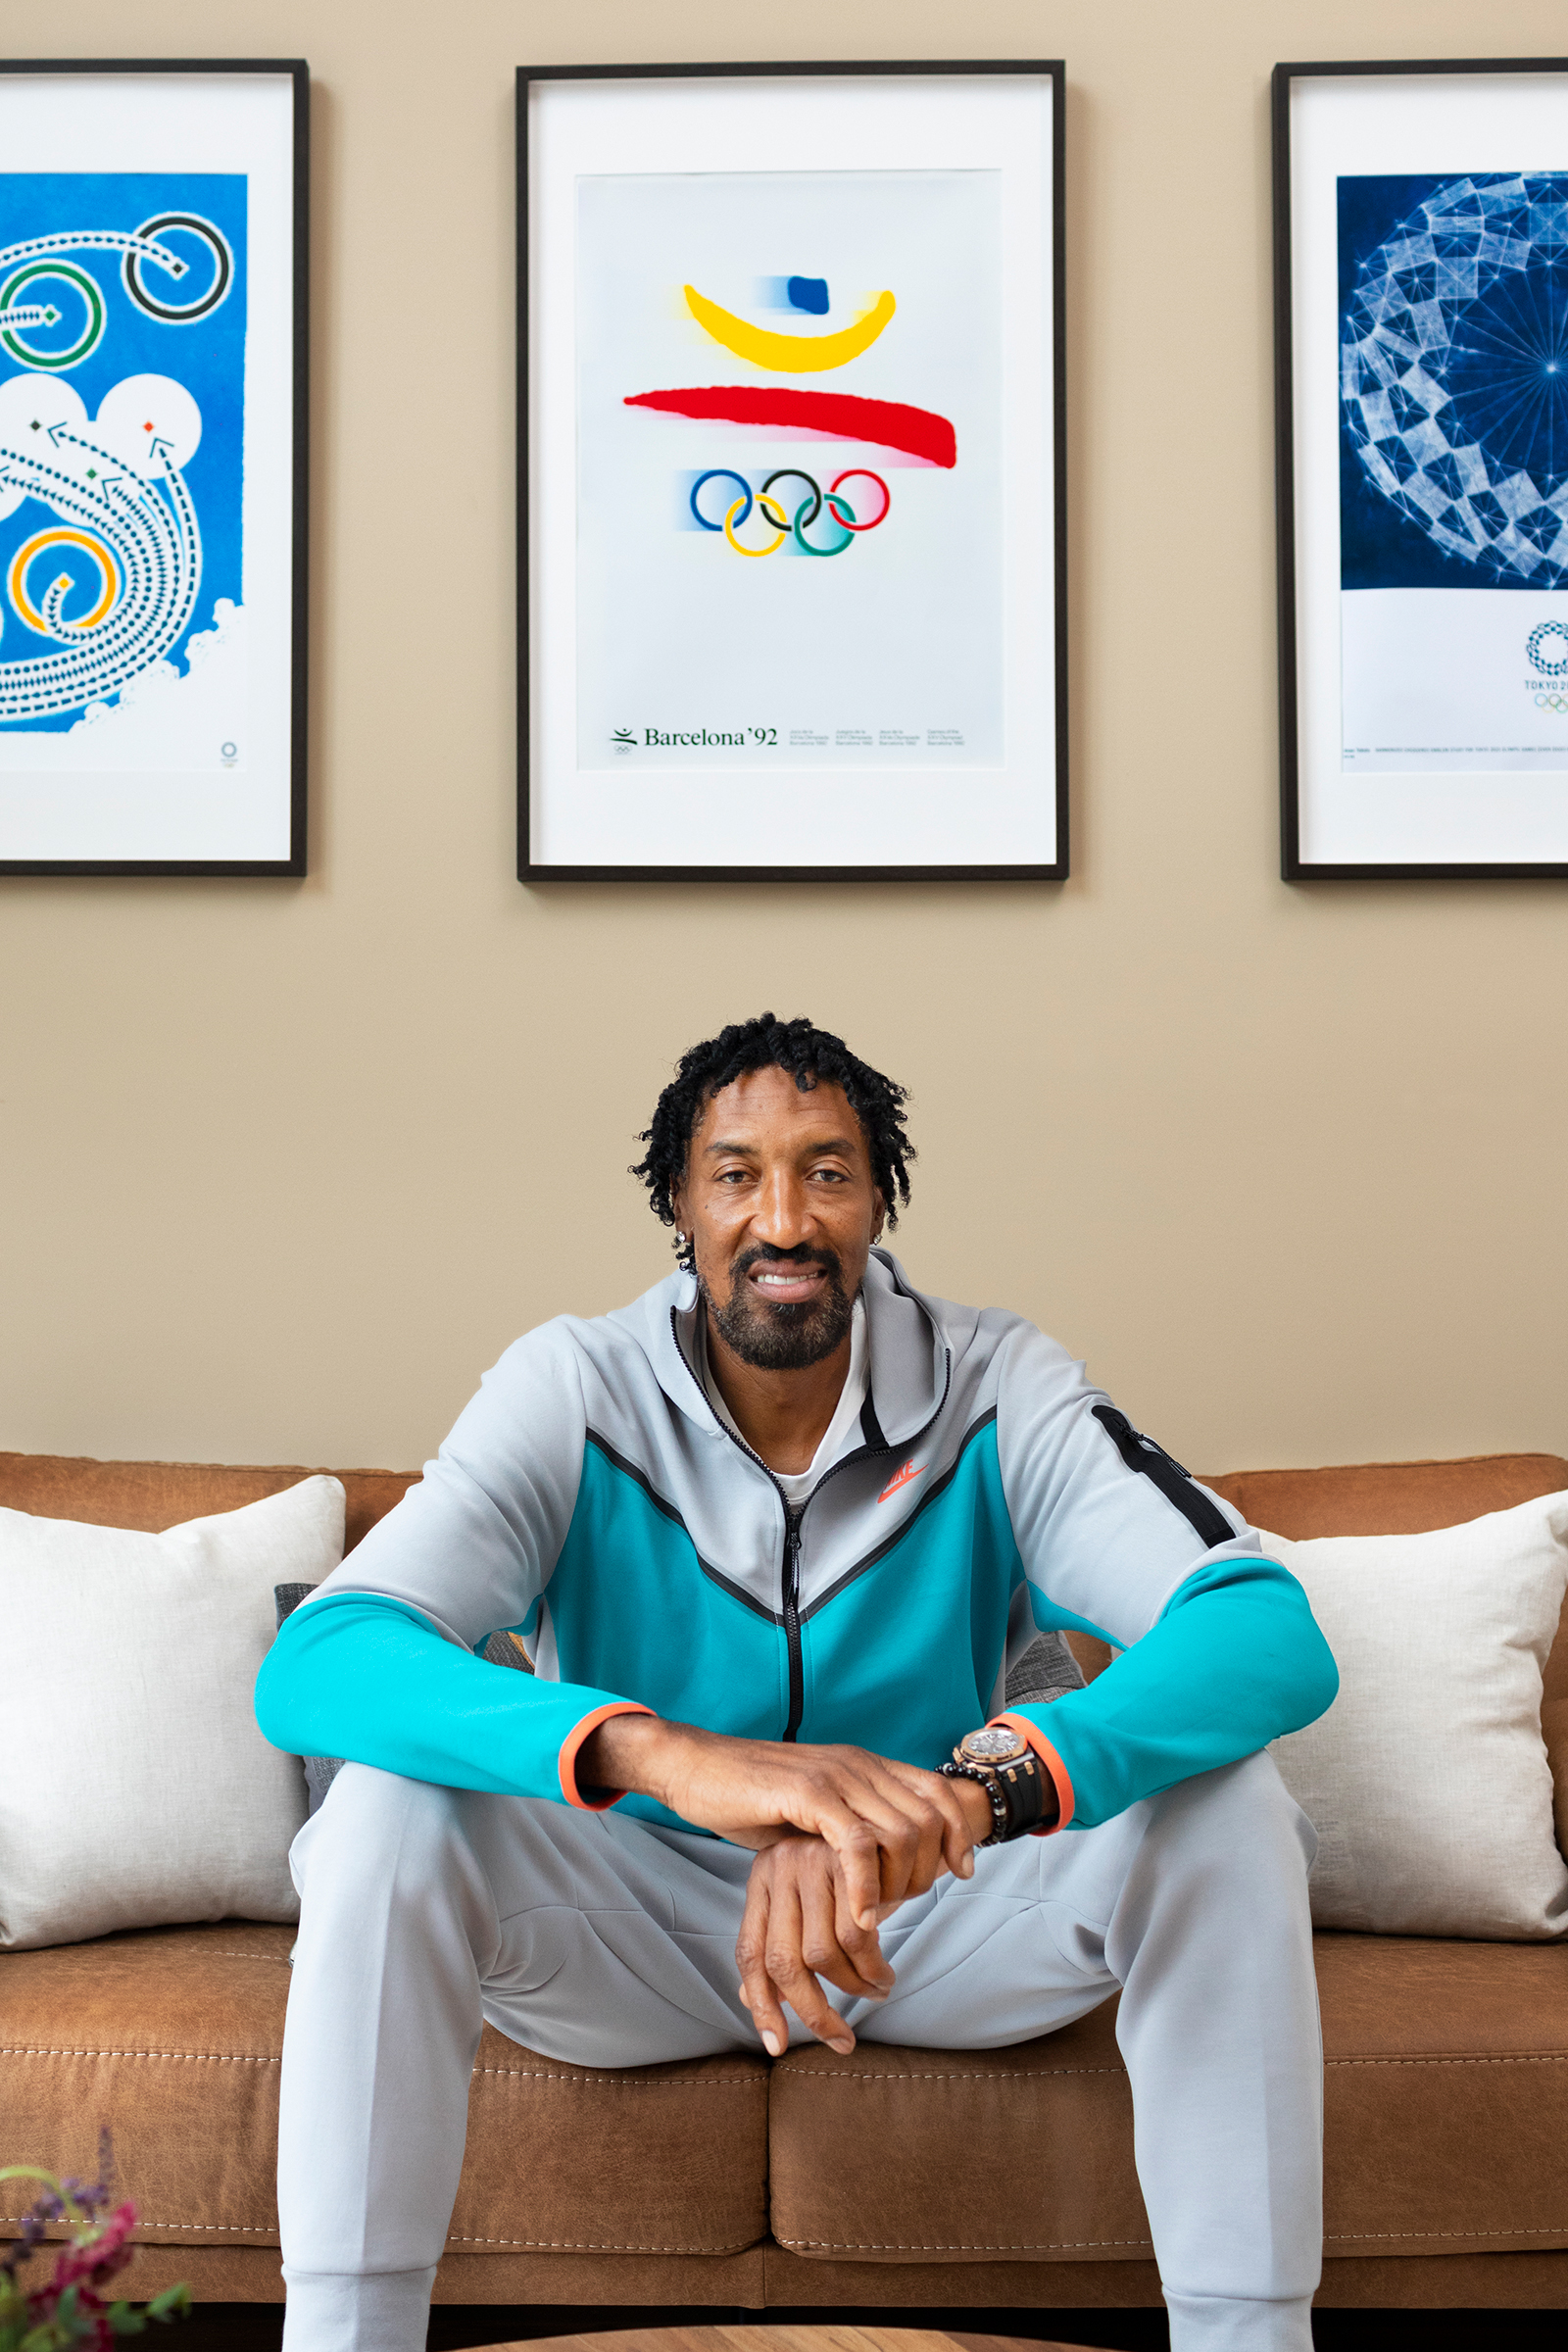 Olympian Scottie Pippen hosts fans at his home court for the